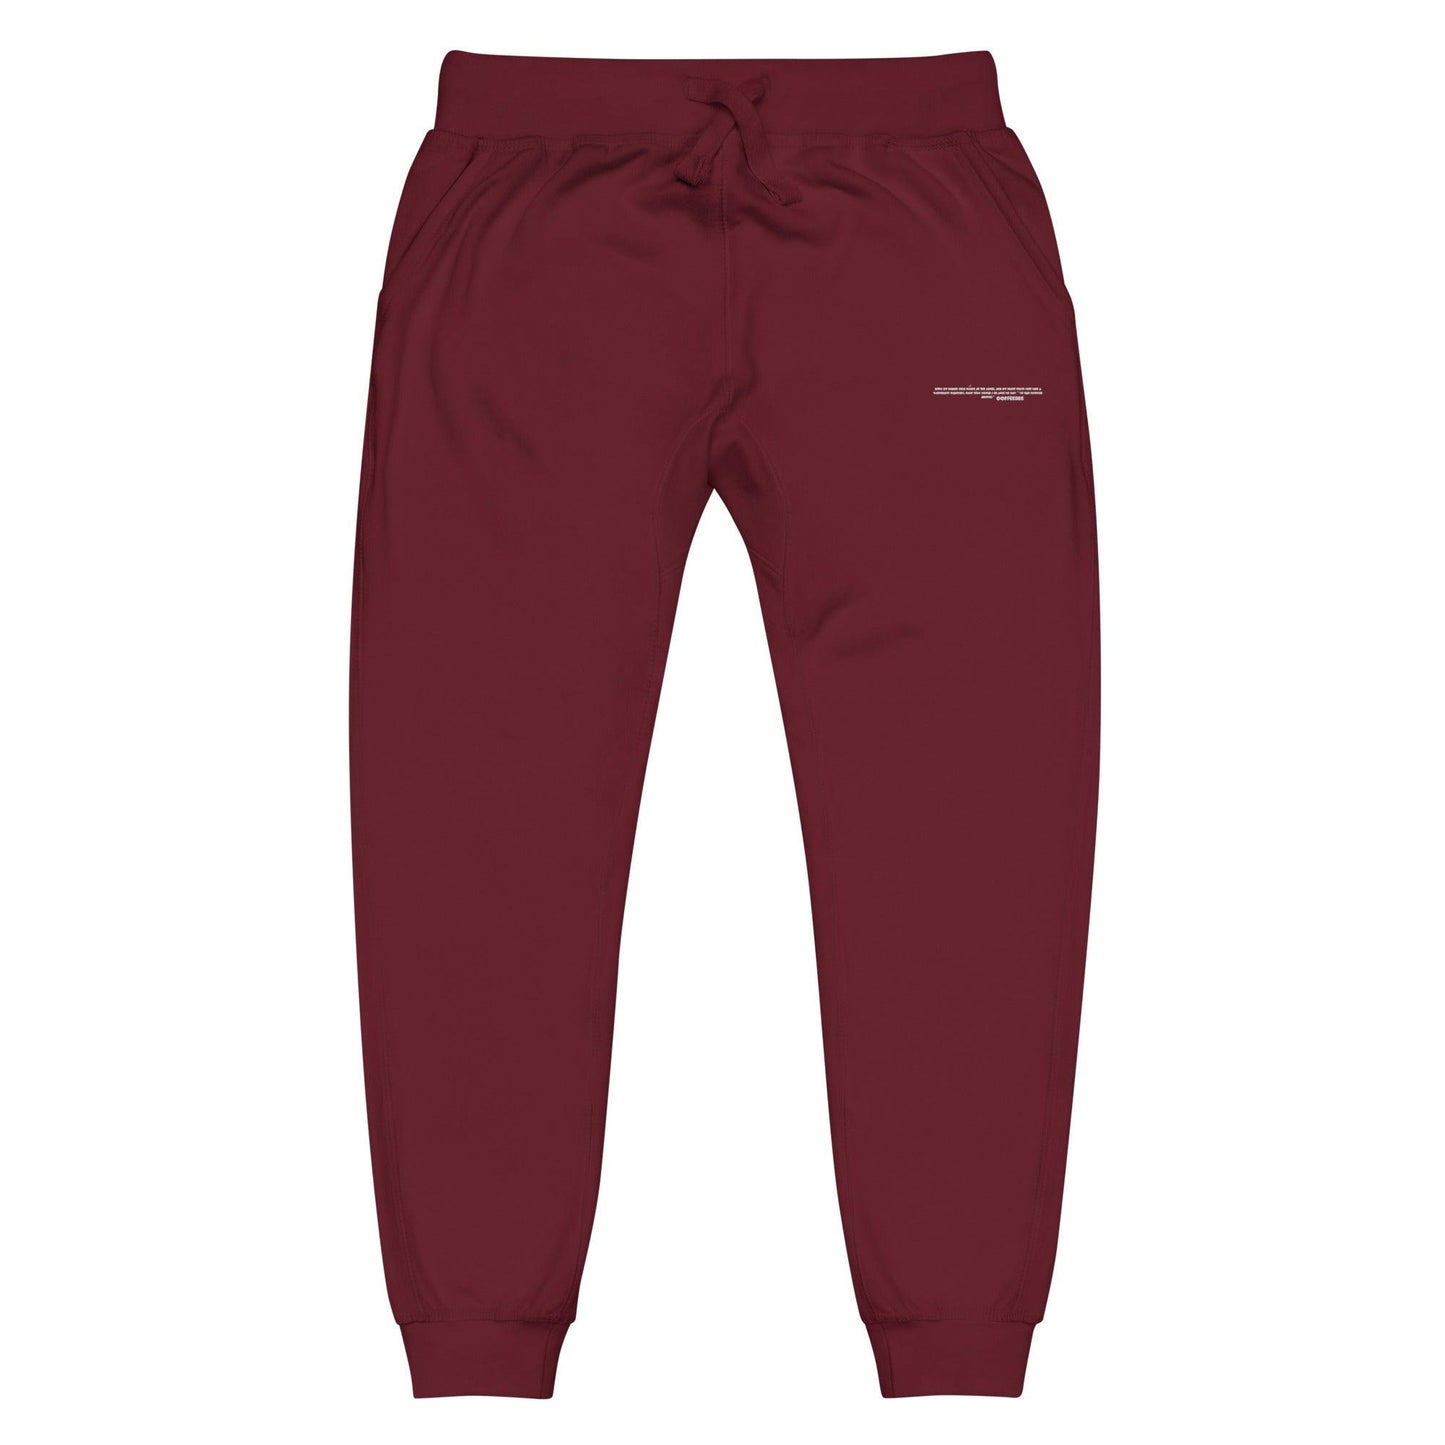 Embroidered Casual Athleisure Fleece Jogger Sweatpants - COFFEEBRE